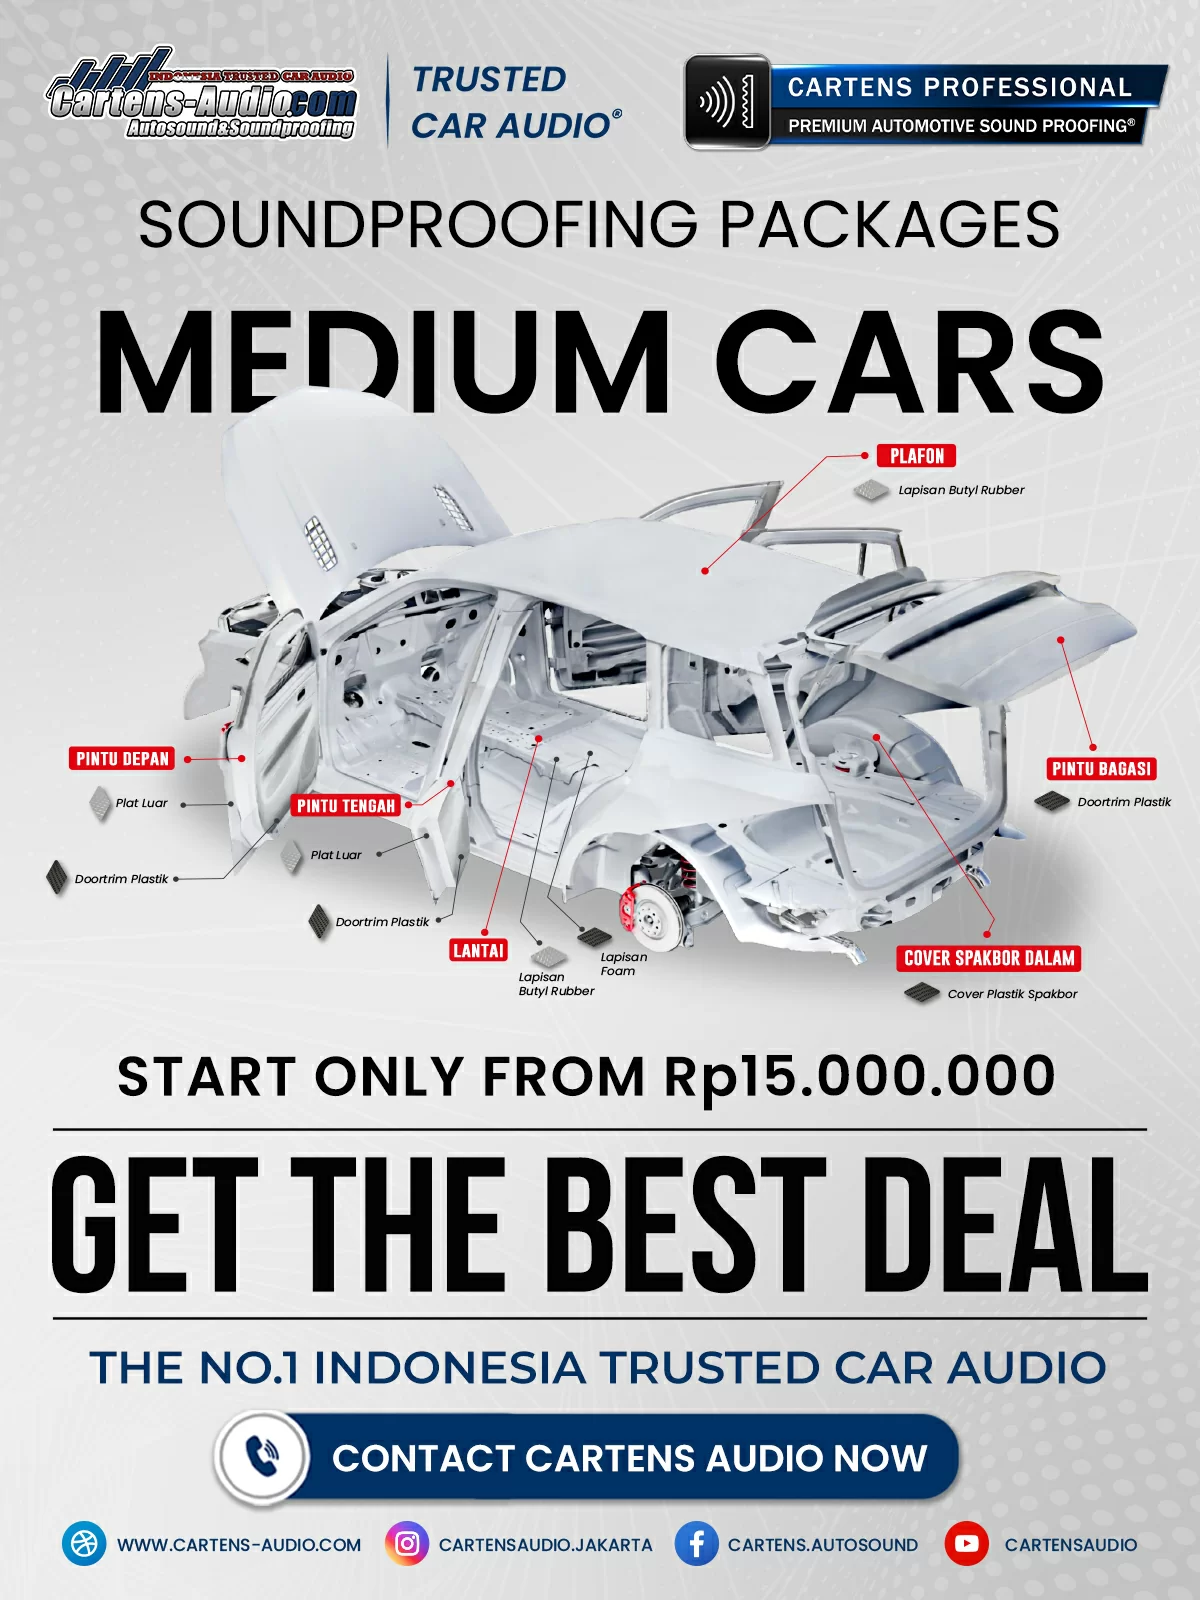 SOUNDPROOFING PACKAGES - MEDIUM CARS